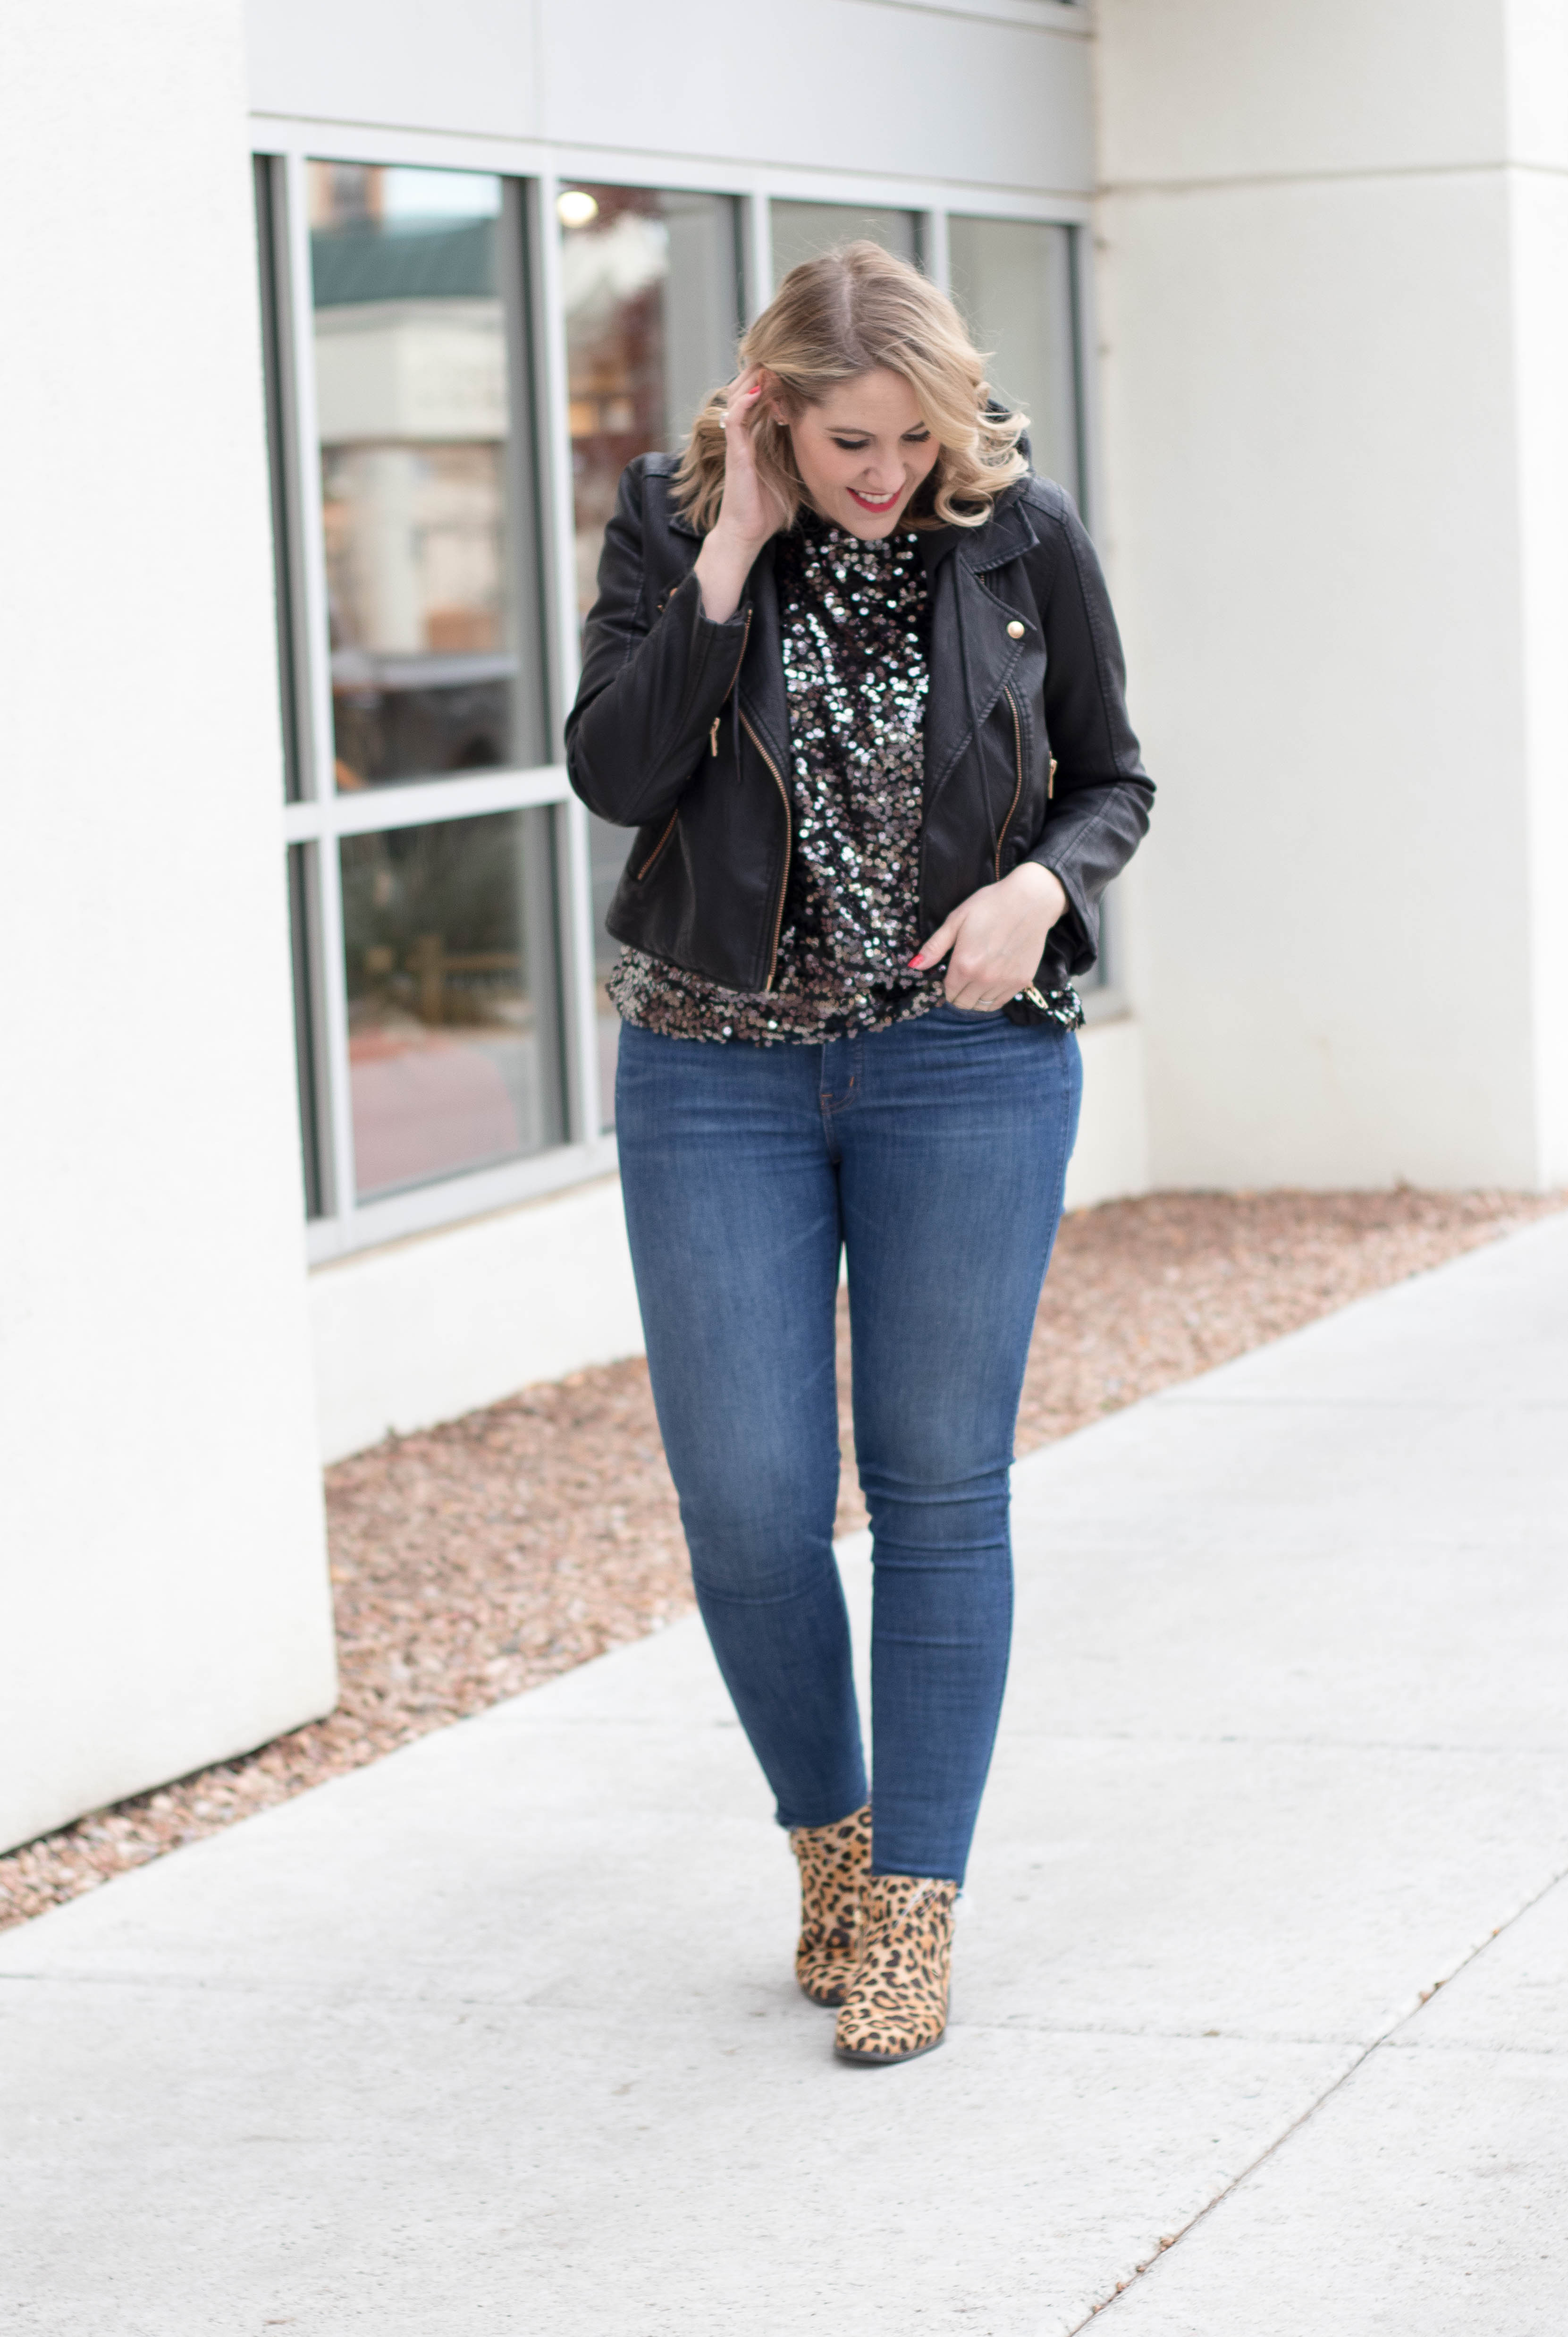 sequin top and leopard boots outfit #tallfashion #holidaystyle #everydaymadewell